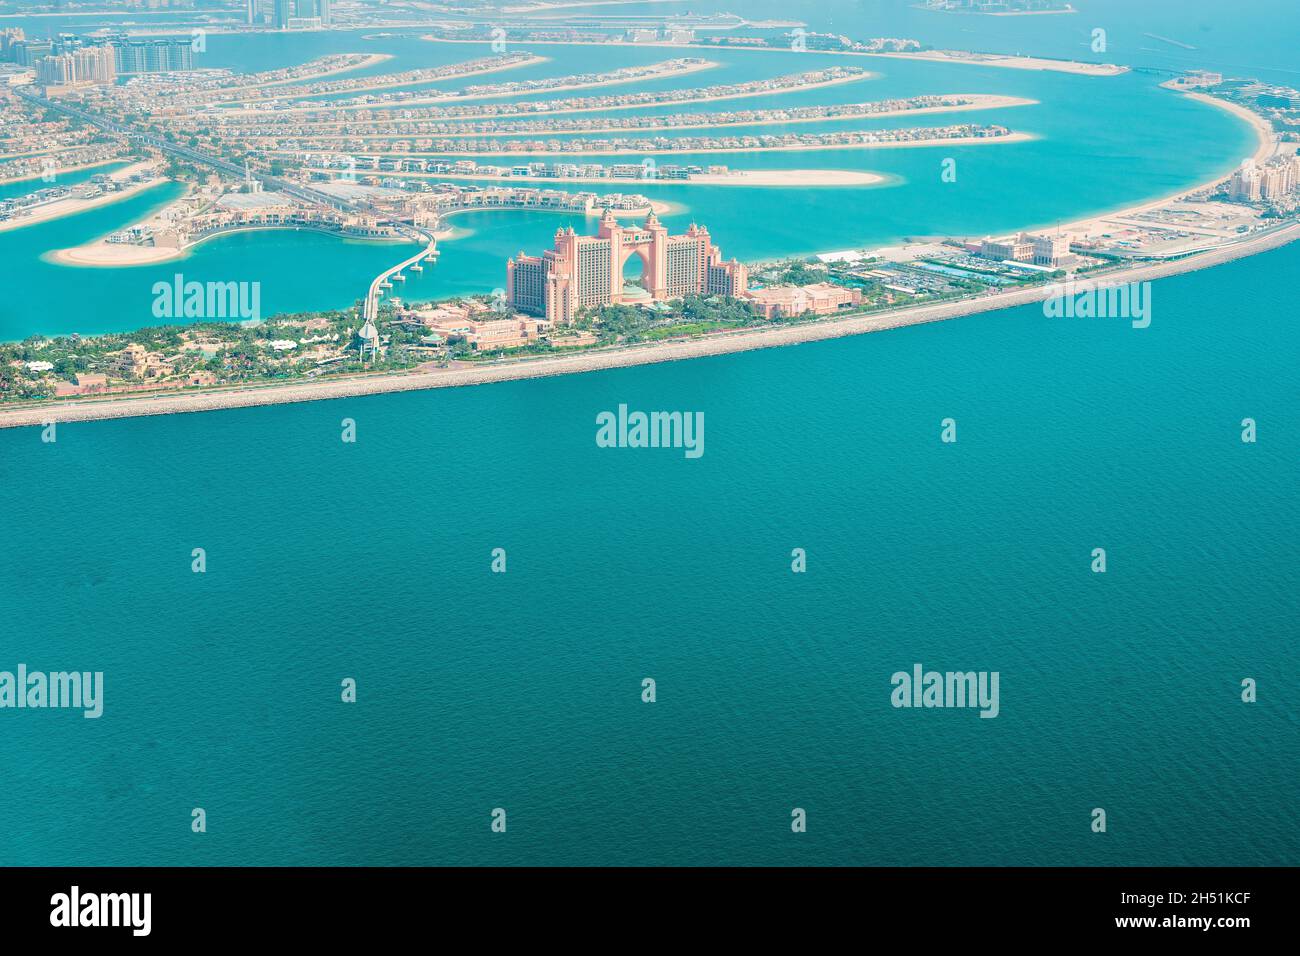 Aerial view of Atlantis The Palm Hotel on Palm Jumeirah island in Dubai, UAE taken in July 2021 Stock Photo